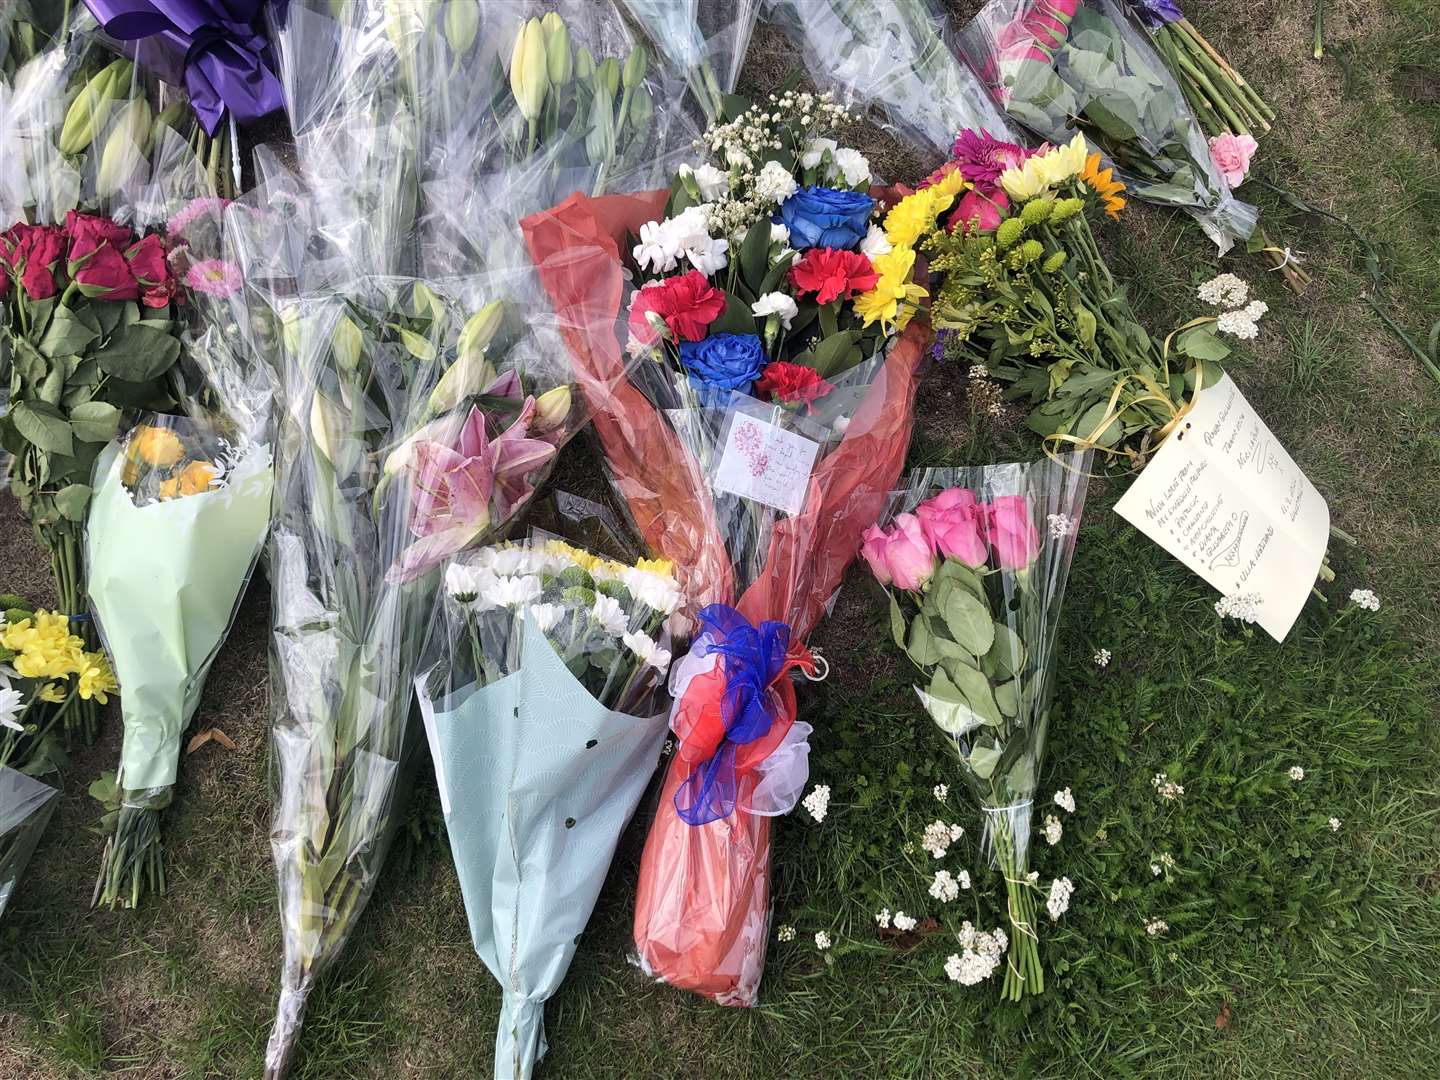 Floral tributes in red, white and blue